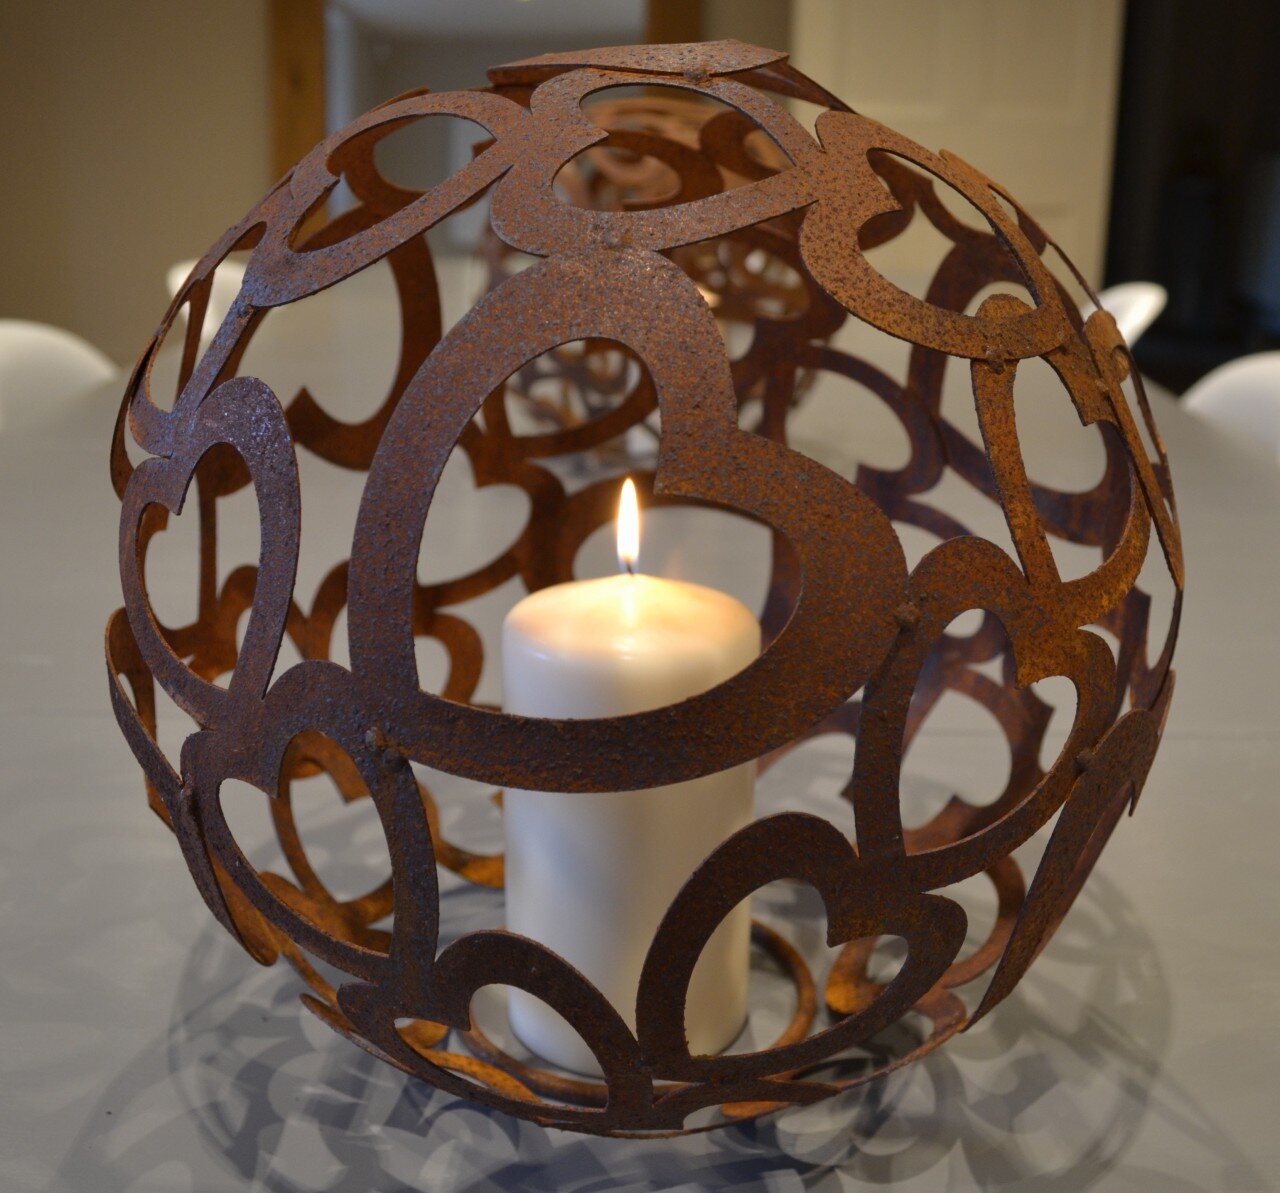 Heart-sphere-with-candle.jpg